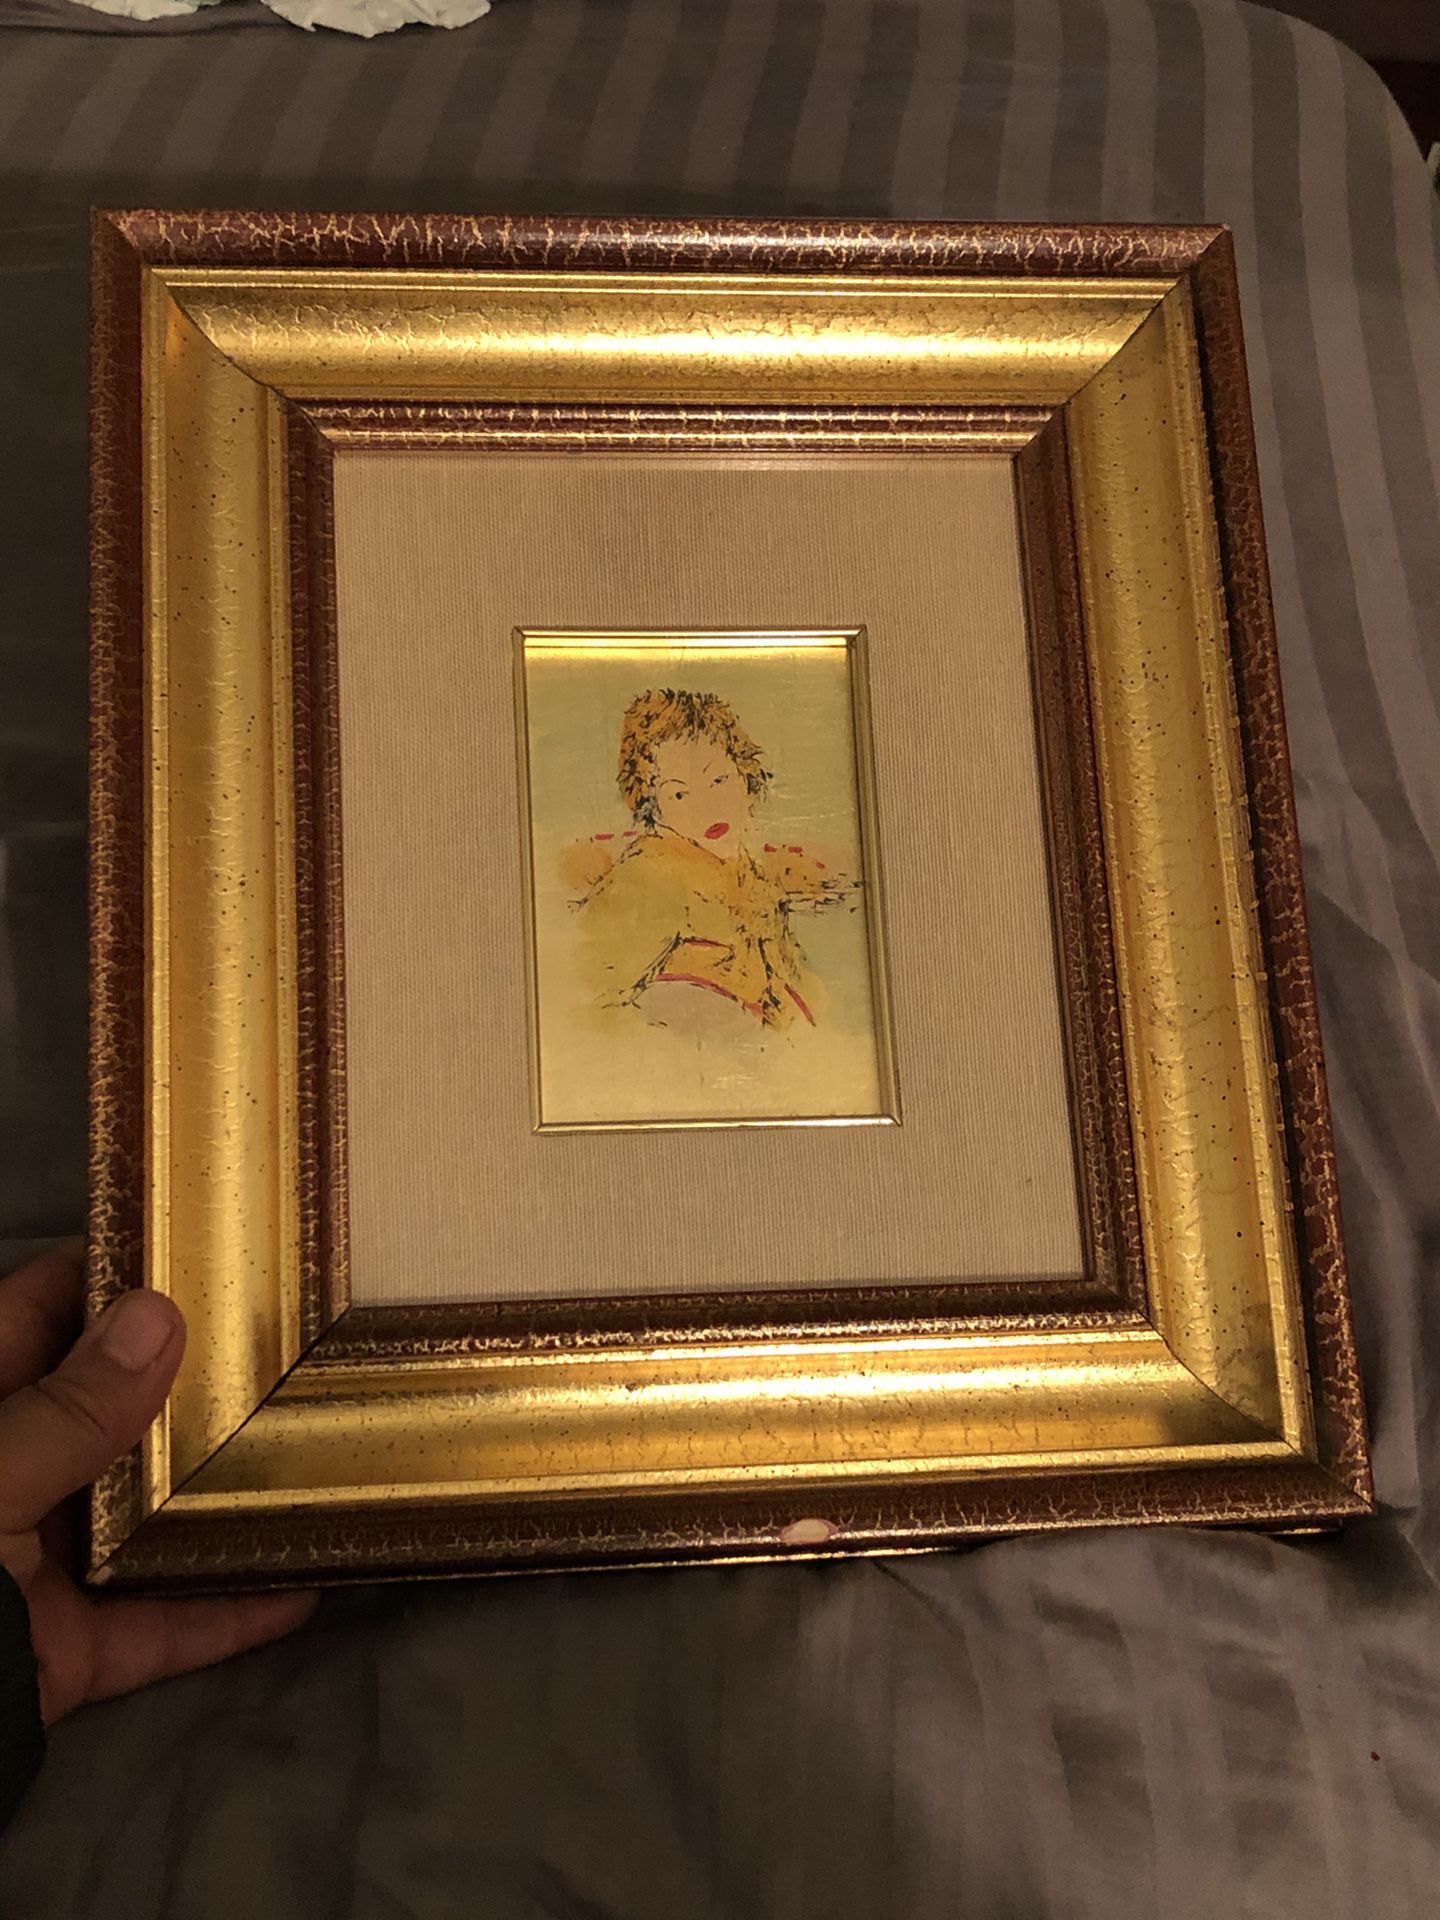 VINTAGE DIPINTO FOGLIA ORO (HAND PAINTED GOLD LEAF) PAINTING